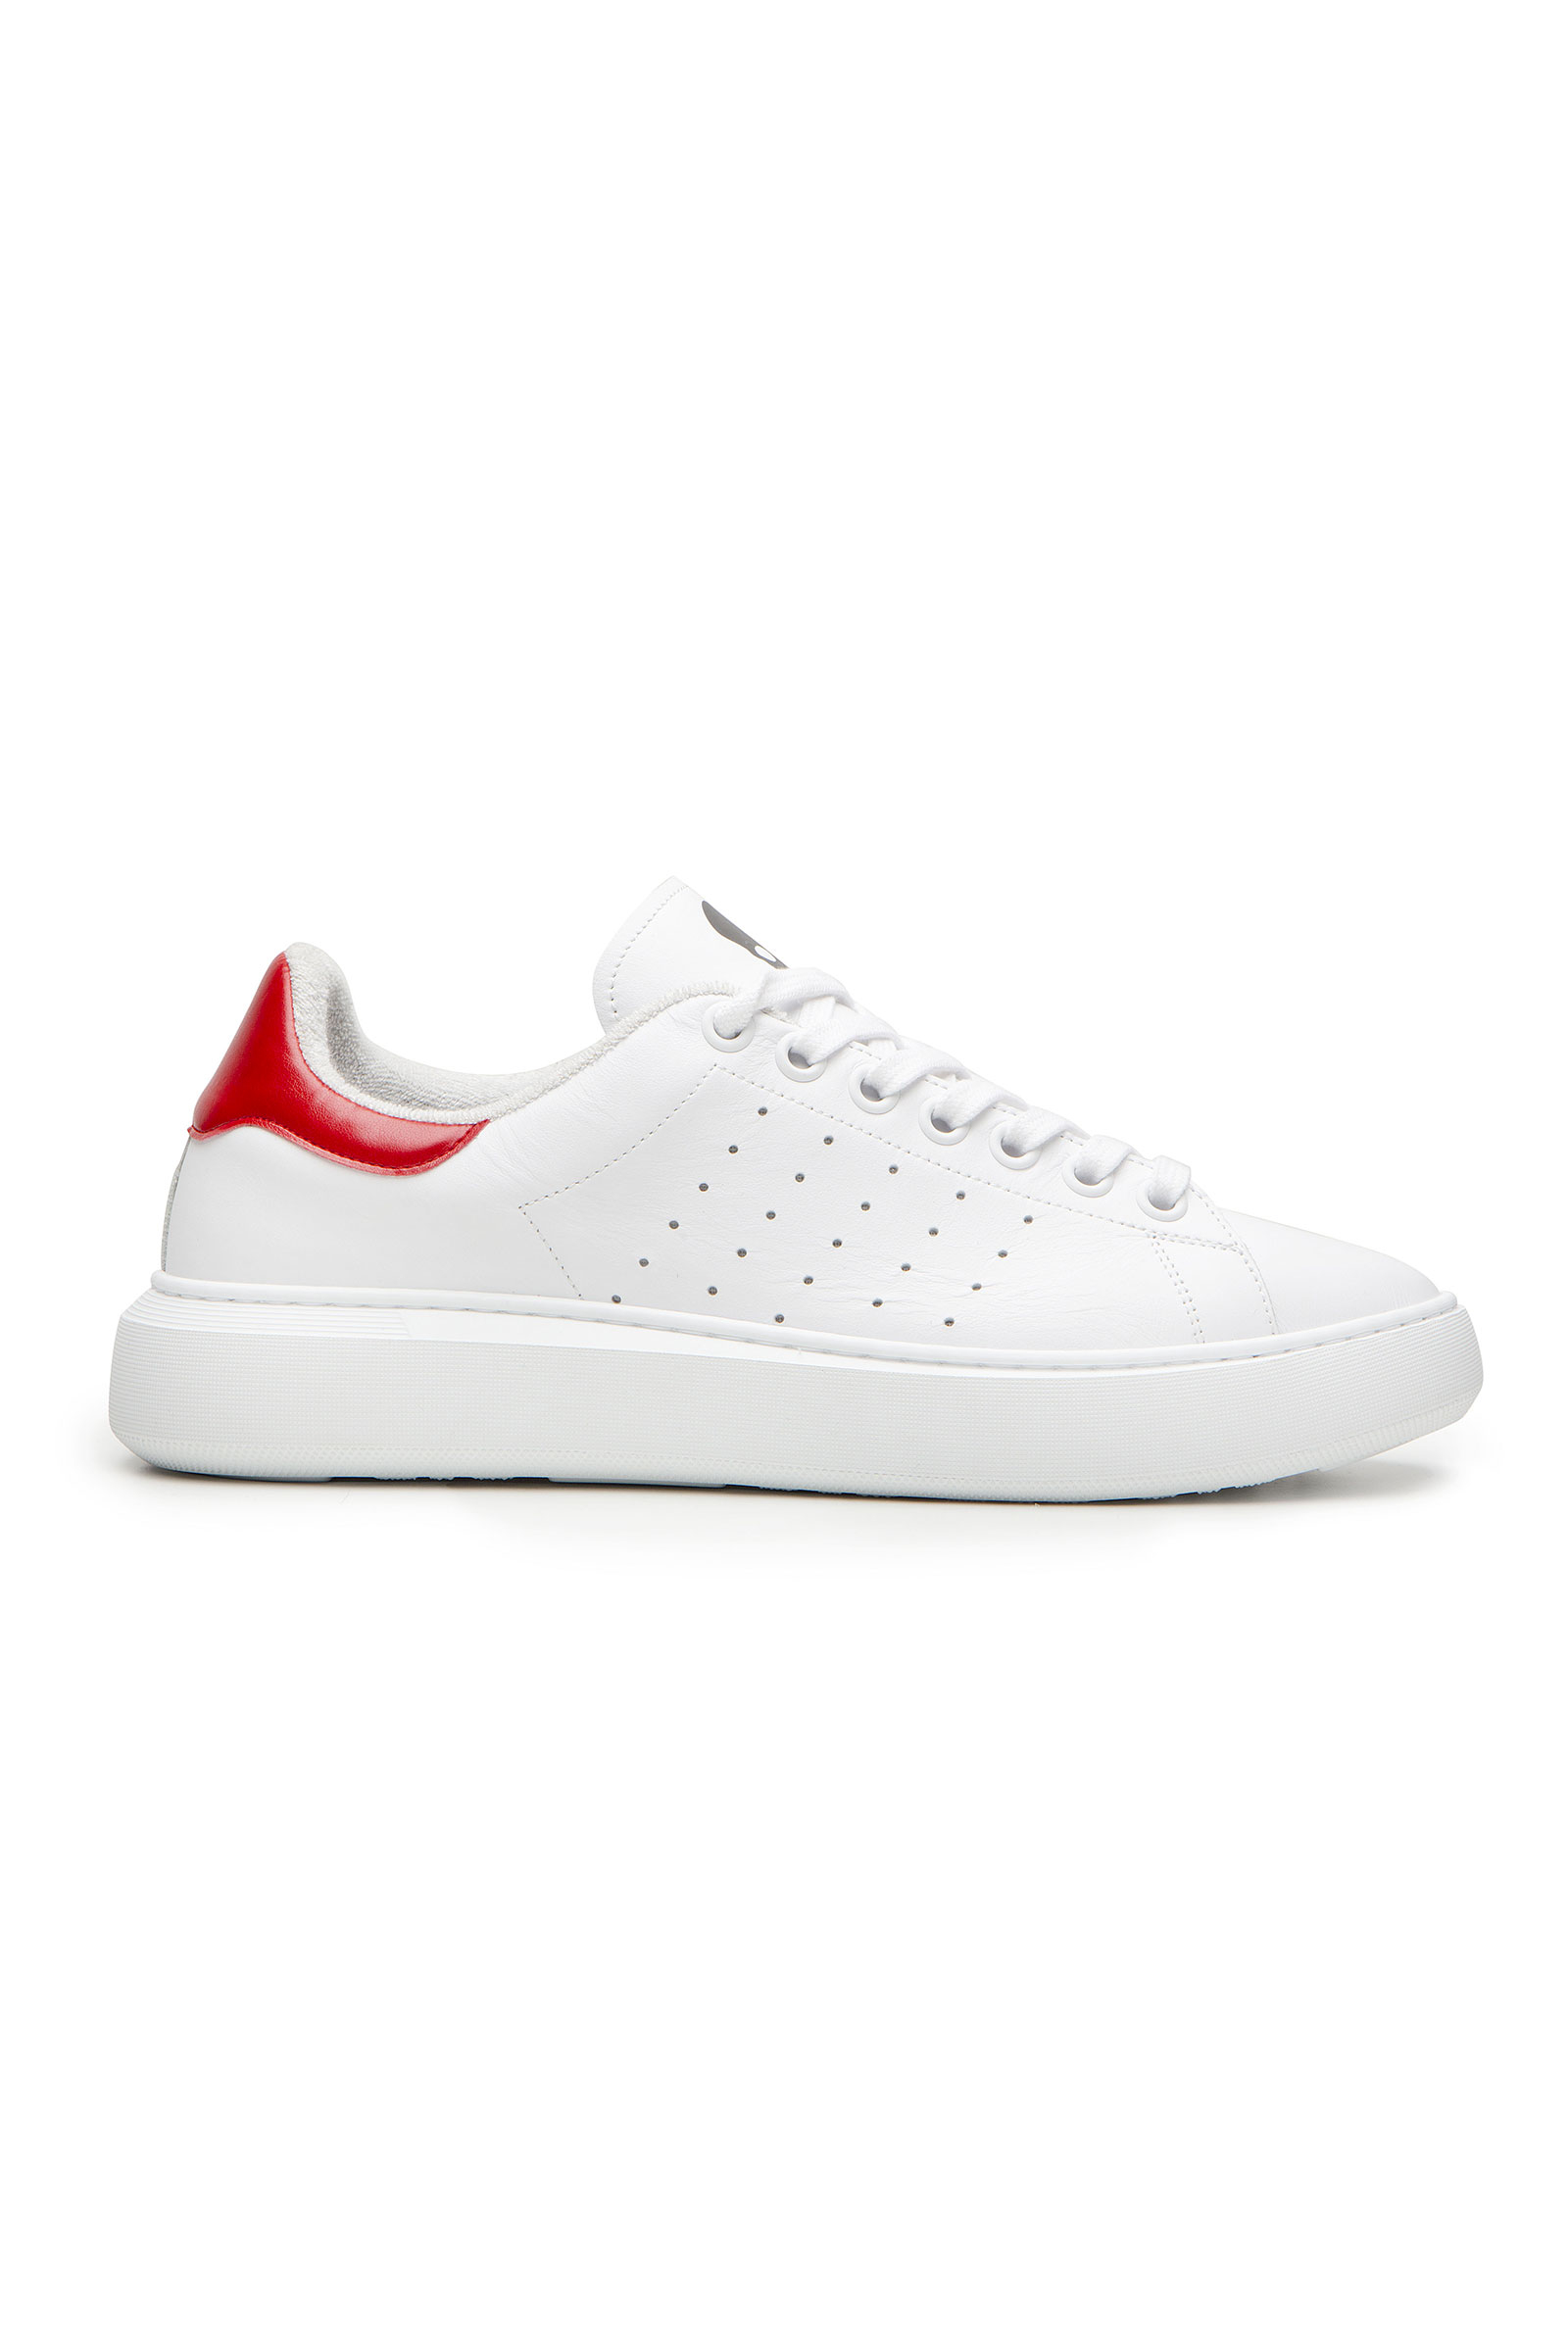 SNEAKERS ITALY LIMITED EDITION - Outlet Hydrogen - Abbigliamento sportivo